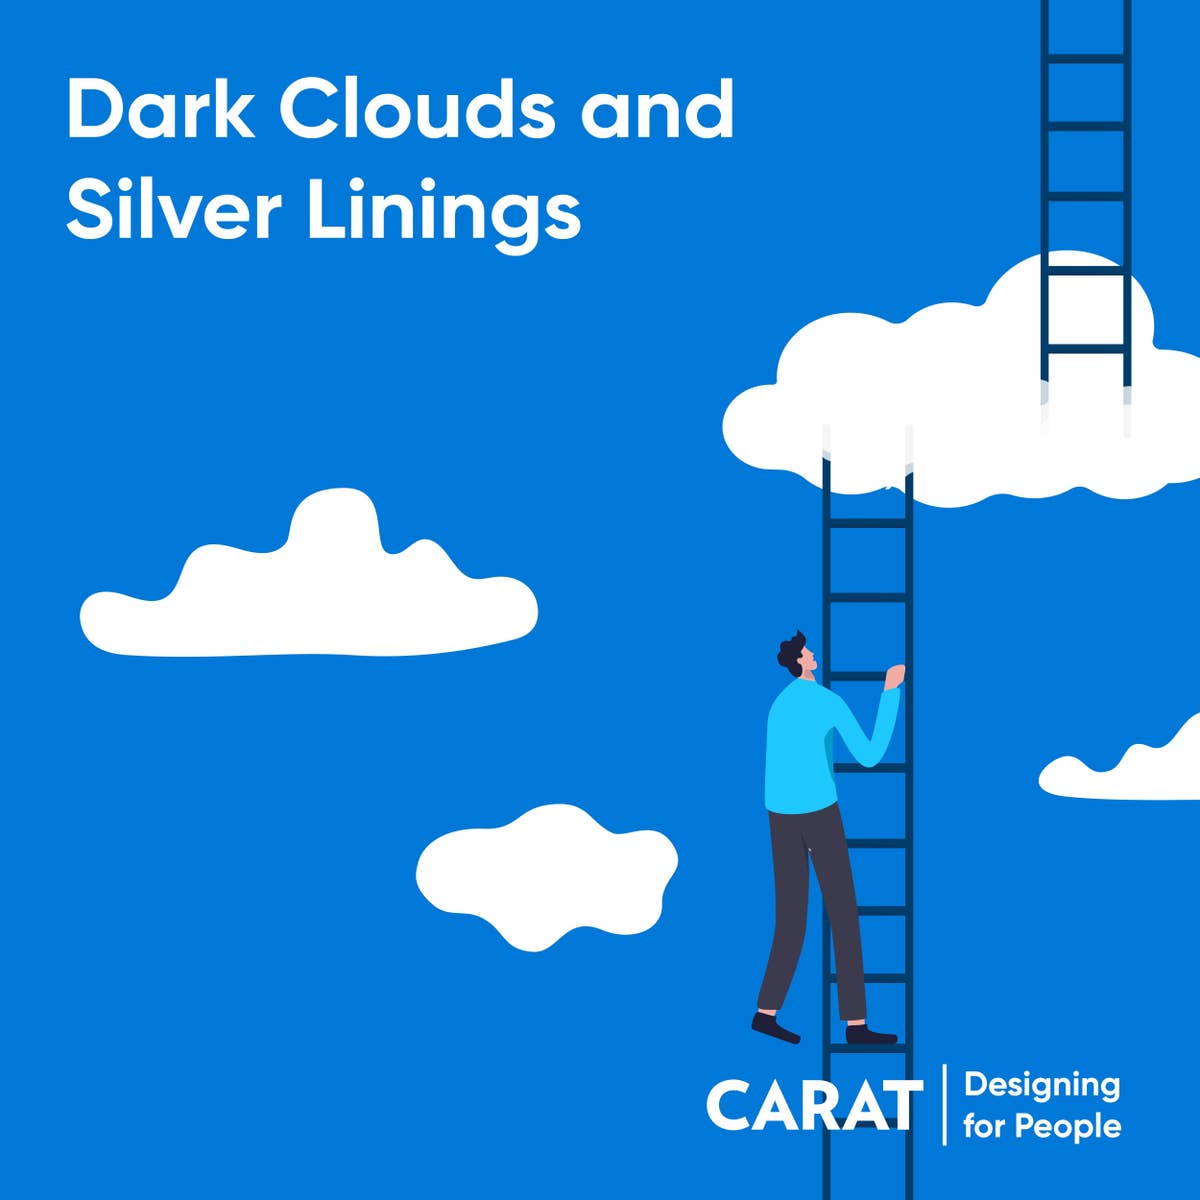 Dark Clouds and Silver Linings: Designing for People in a recession, and the opportunity to create competitive advantage